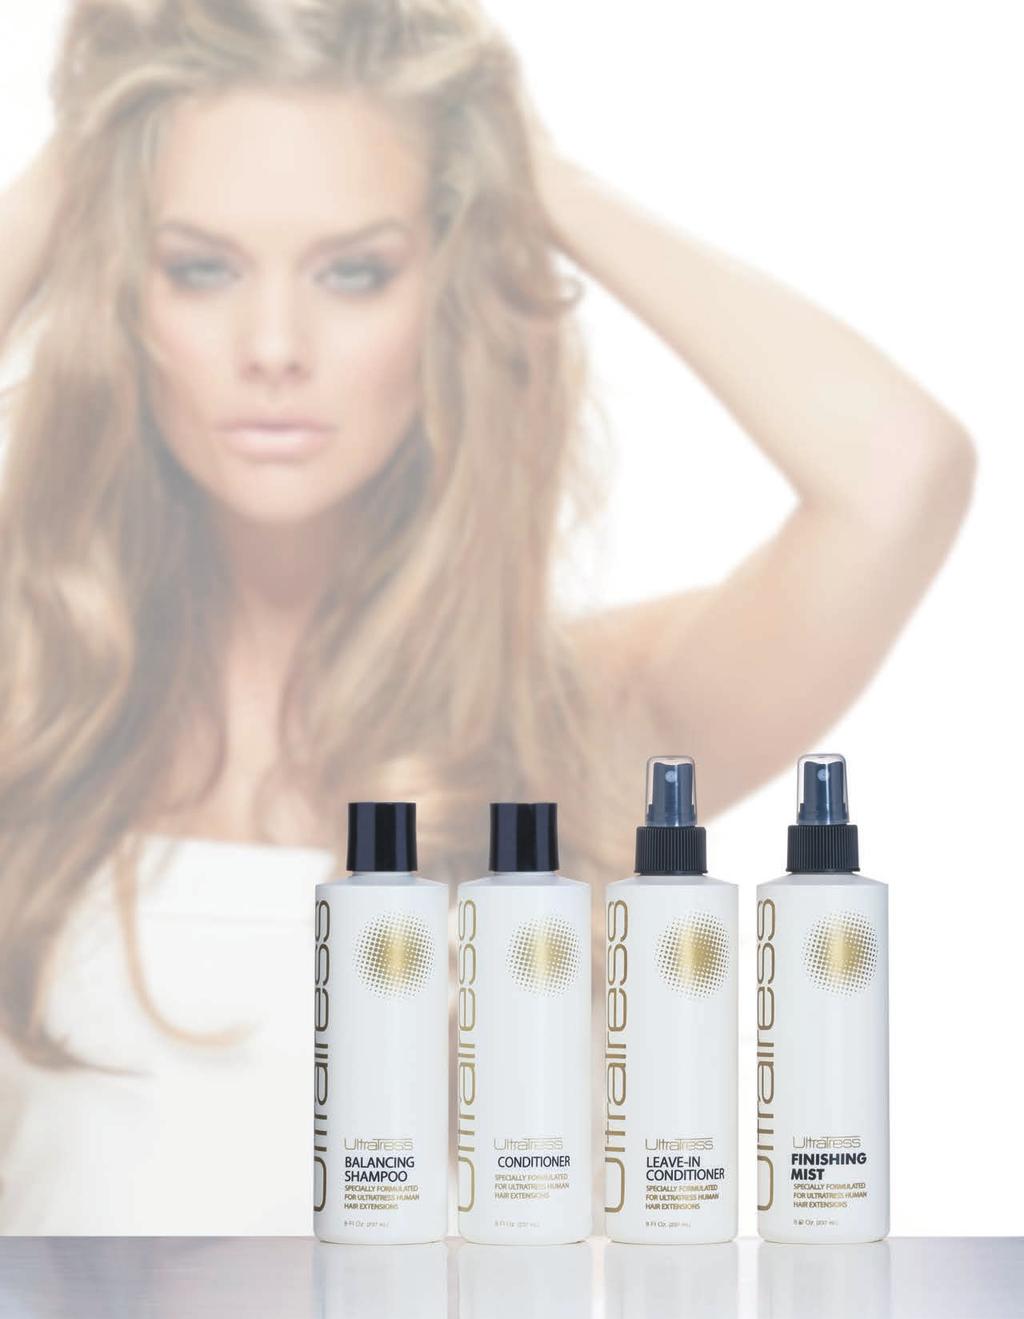 ULTRATRESS HAIR CARE After years of research in top salons around the world, UltraTress developed a hair care line exclusively formulated for UltraTress Human Hair Extensions.